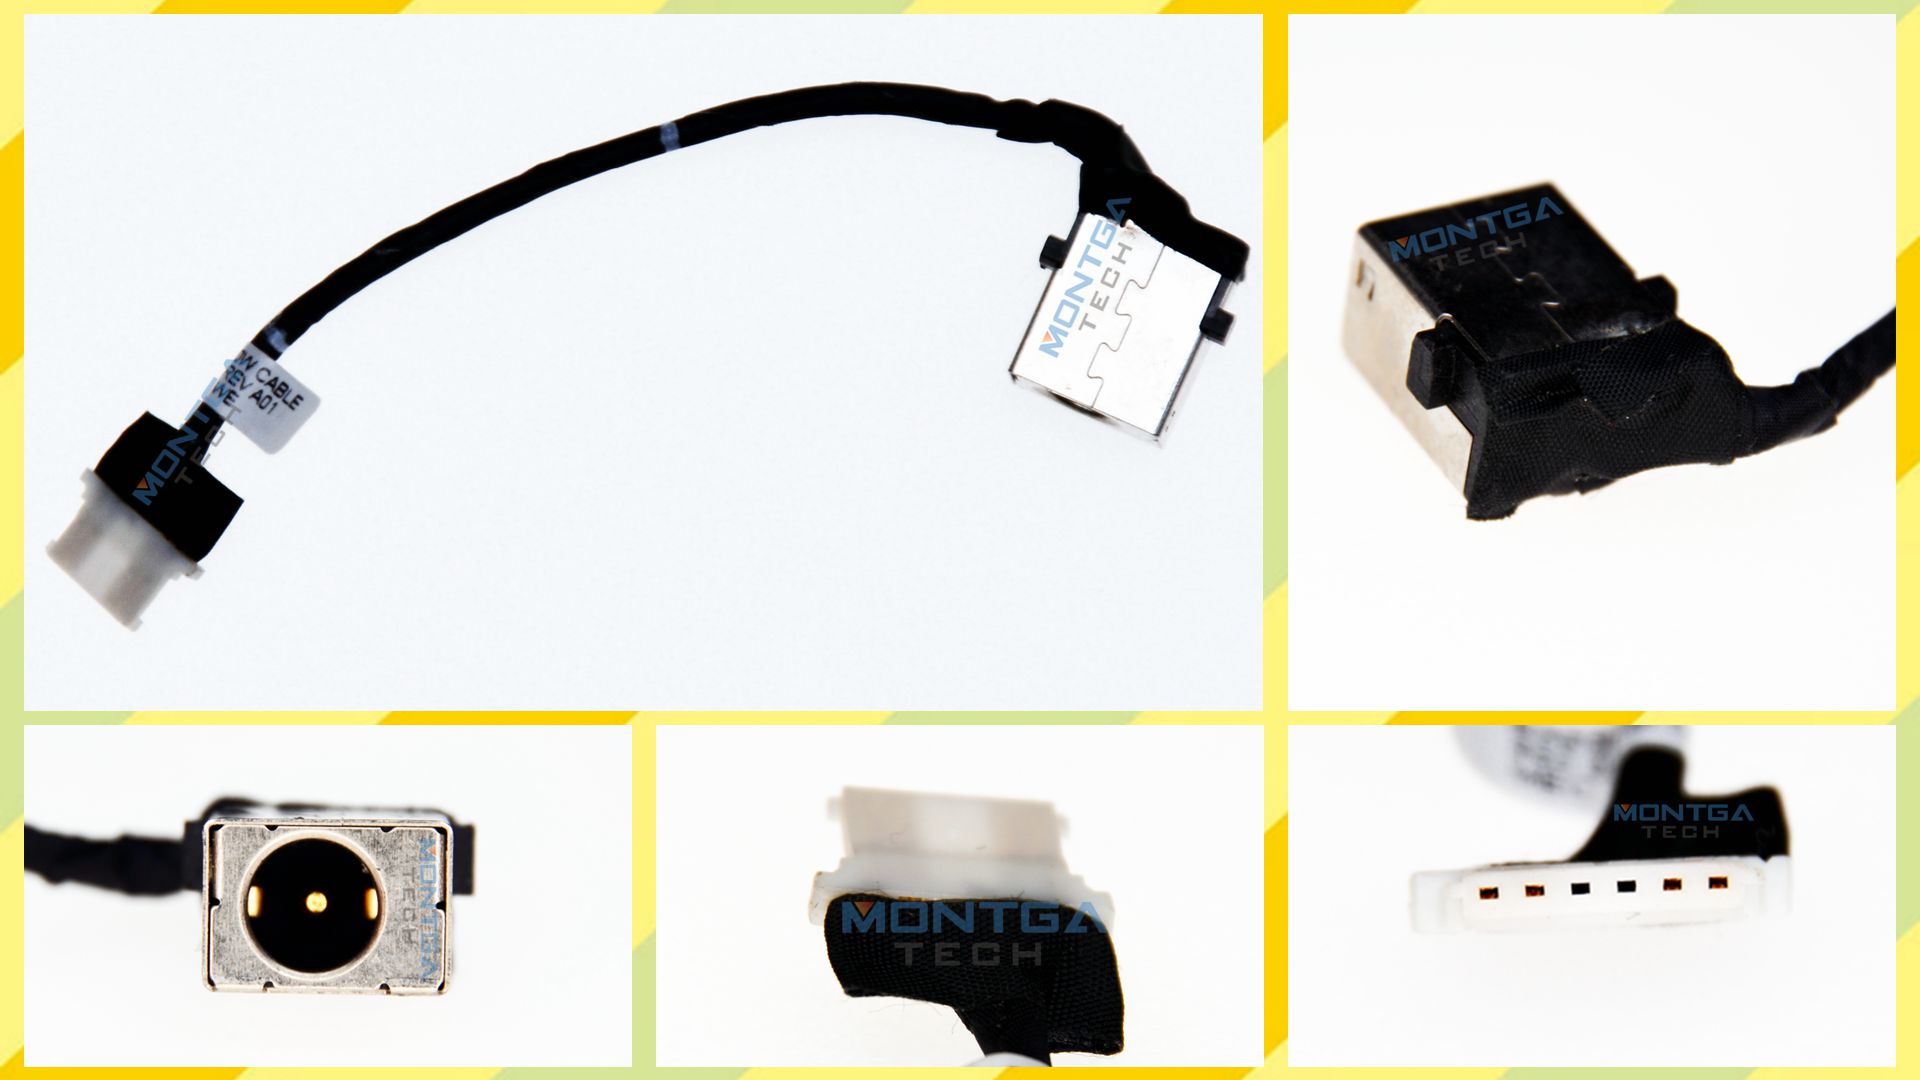 Packard Bell TG71 charging connector, Packard Bell TG71 DC Power Jack, Packard Bell TG71 DC IN Cable, Packard Bell TG71 Power Jack, Packard Bell TG71 plug, Packard Bell TG71 Jack socket, Packard Bell TG71 connecteur de charge, 